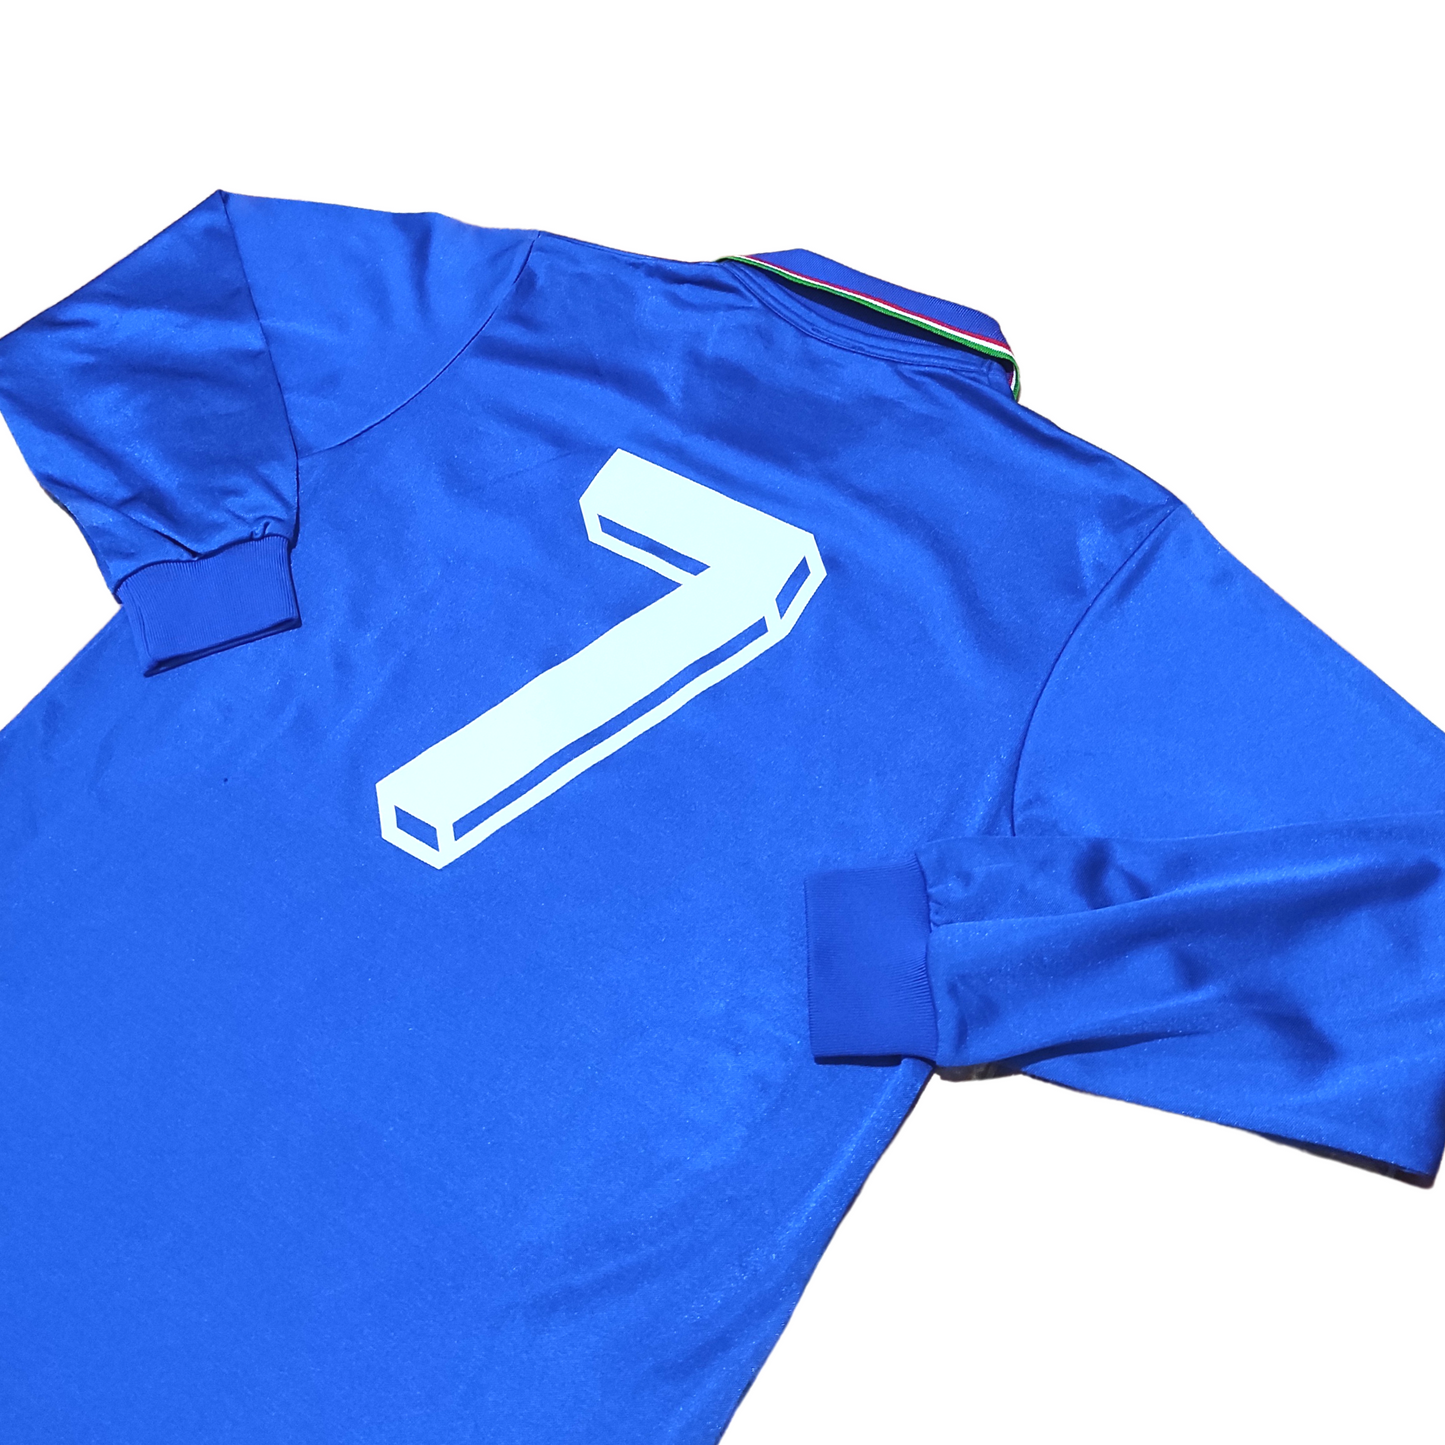 Italy Home L/S Shirt 1986-1987 #7 (L)